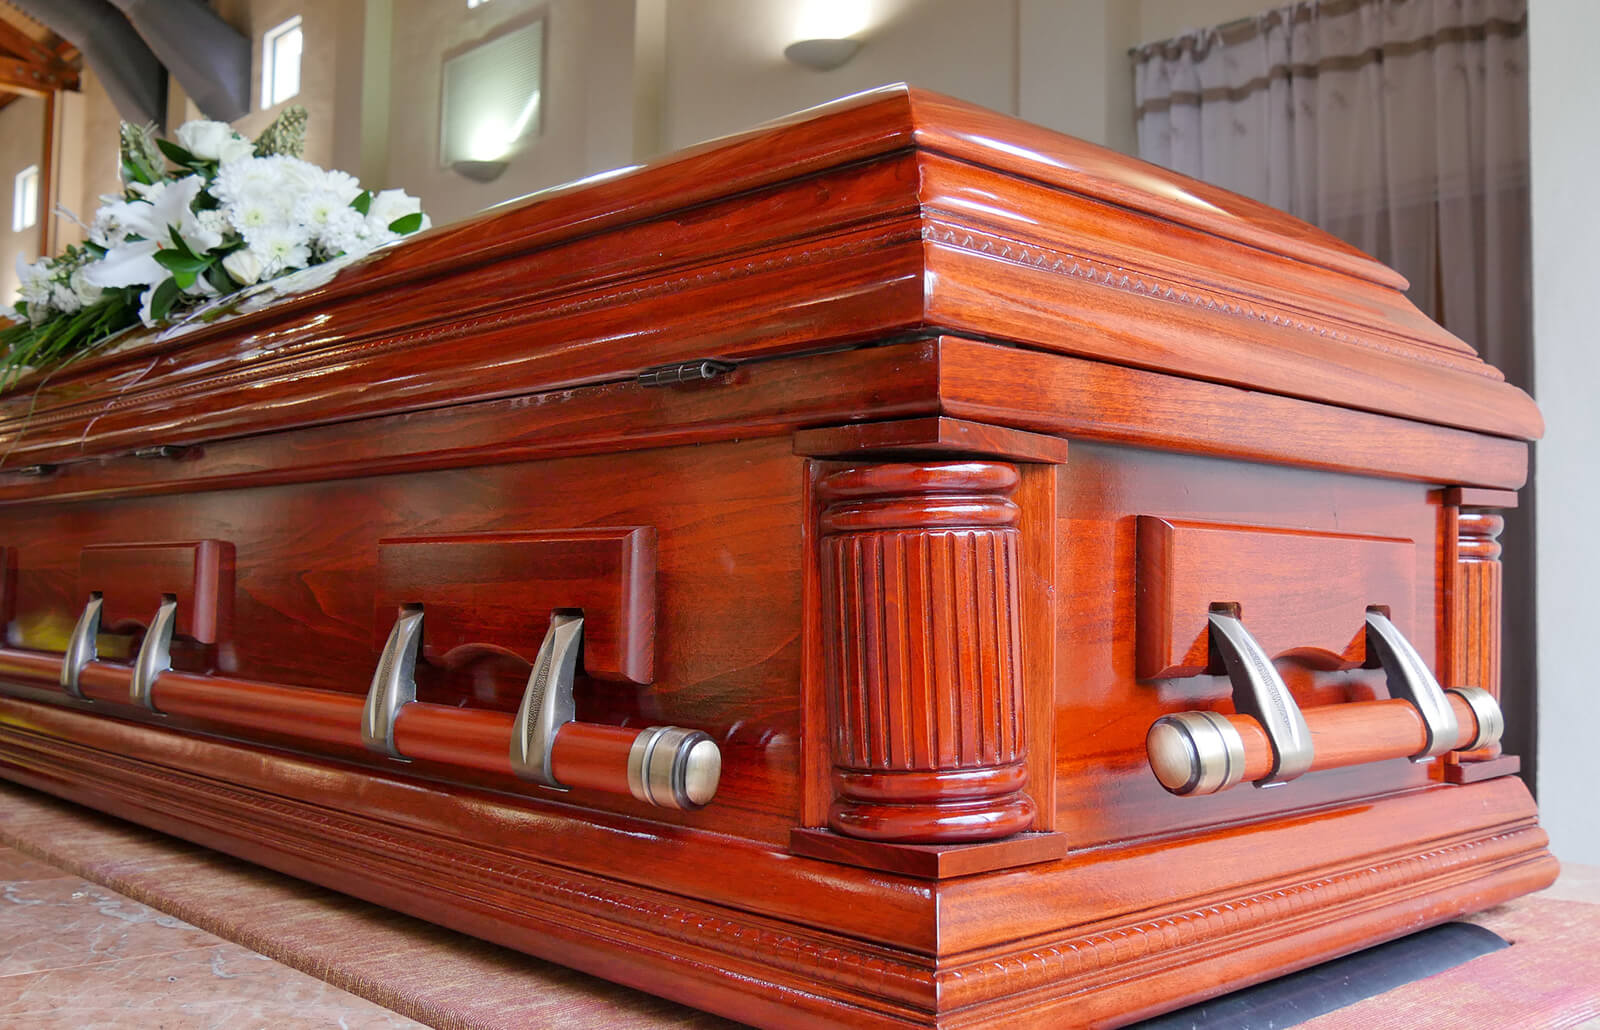 Family Traumatizing Funeral Home Confusion discovered stranger in grandmother casket!